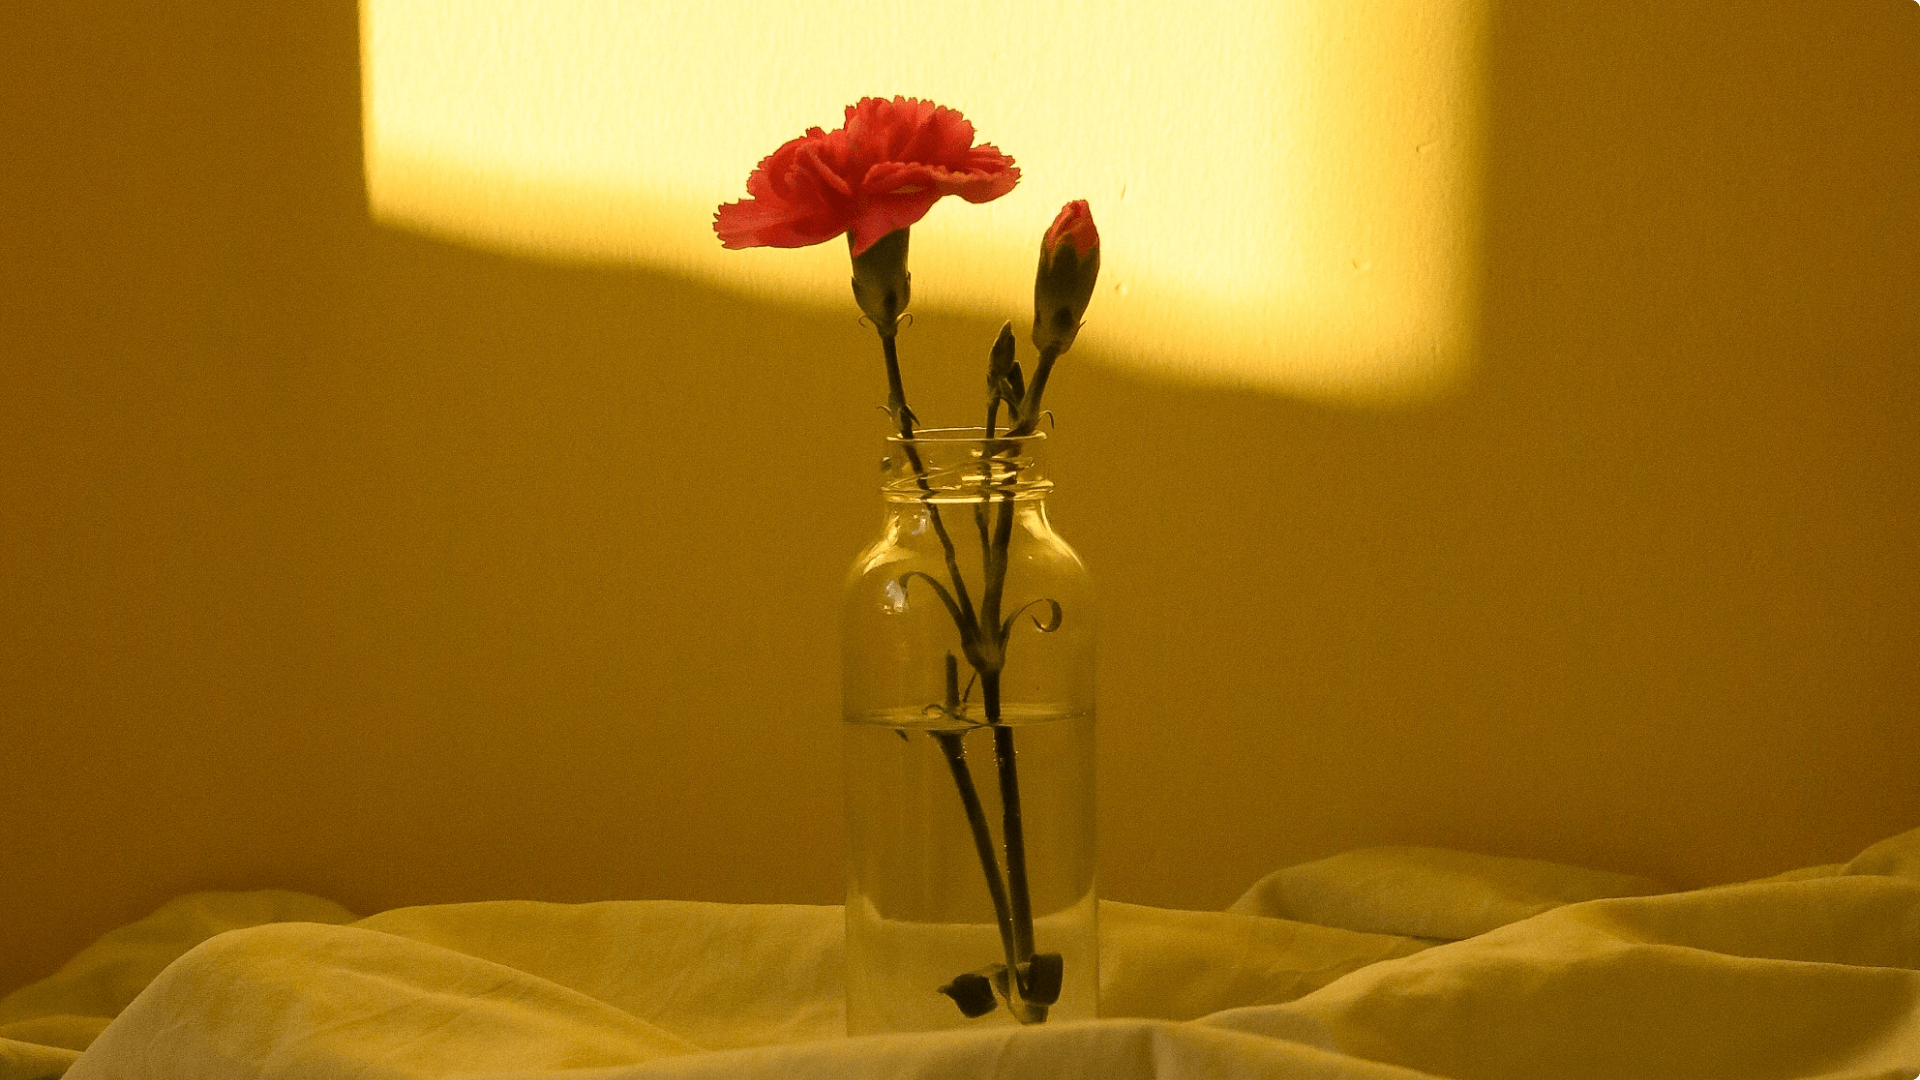 Photograph of flowers in a jar with a sunlight hitting the wall in the background